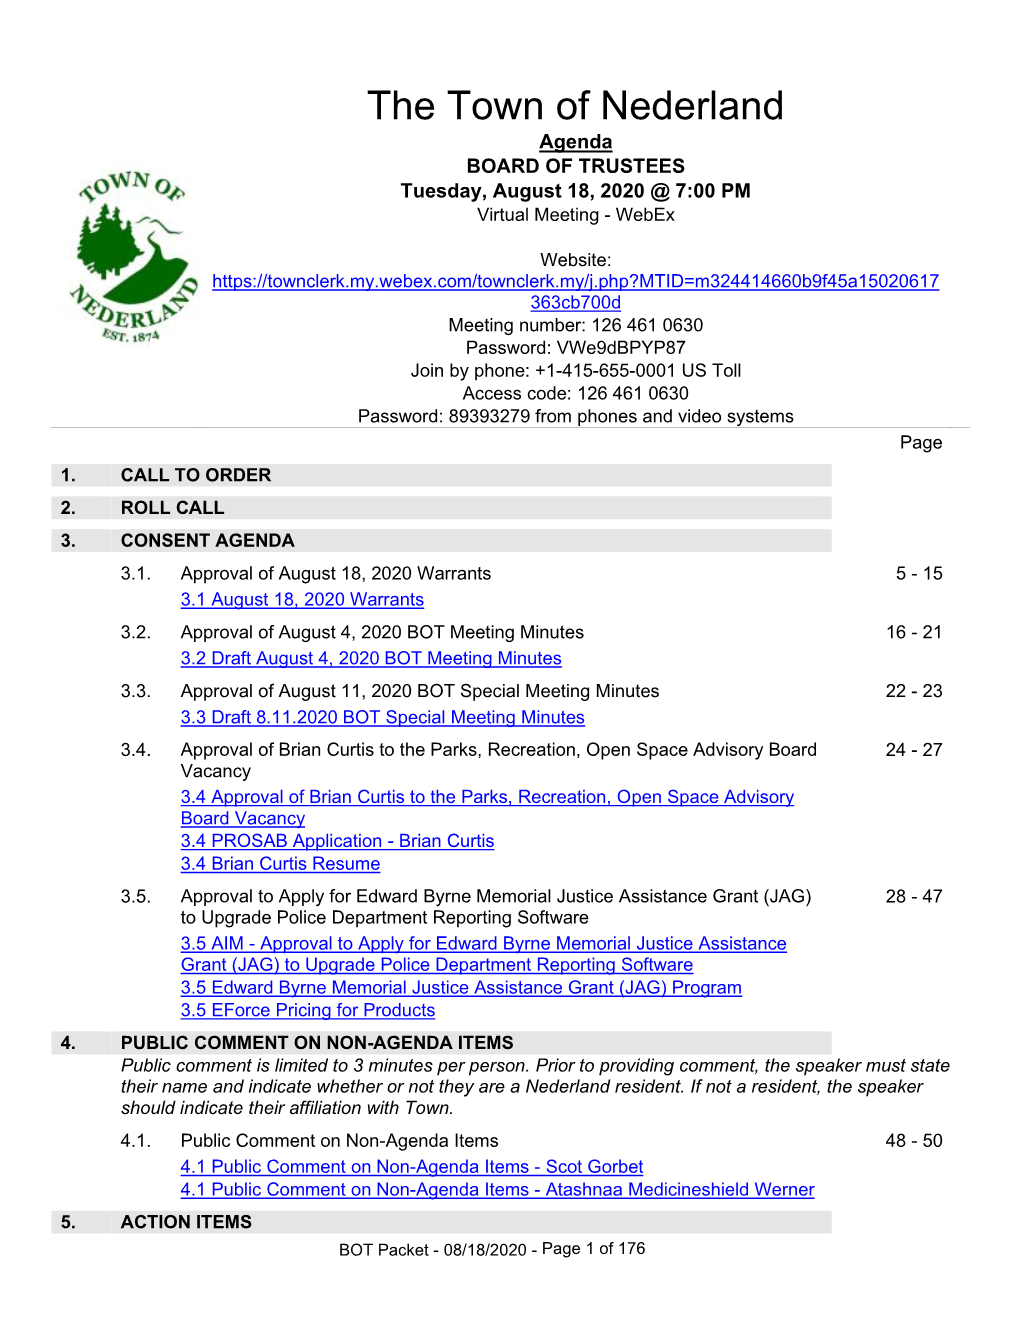 BOARD of TRUSTEES Tuesday, August 18, 2020 @ 7:00 PM Virtual Meeting - Webex